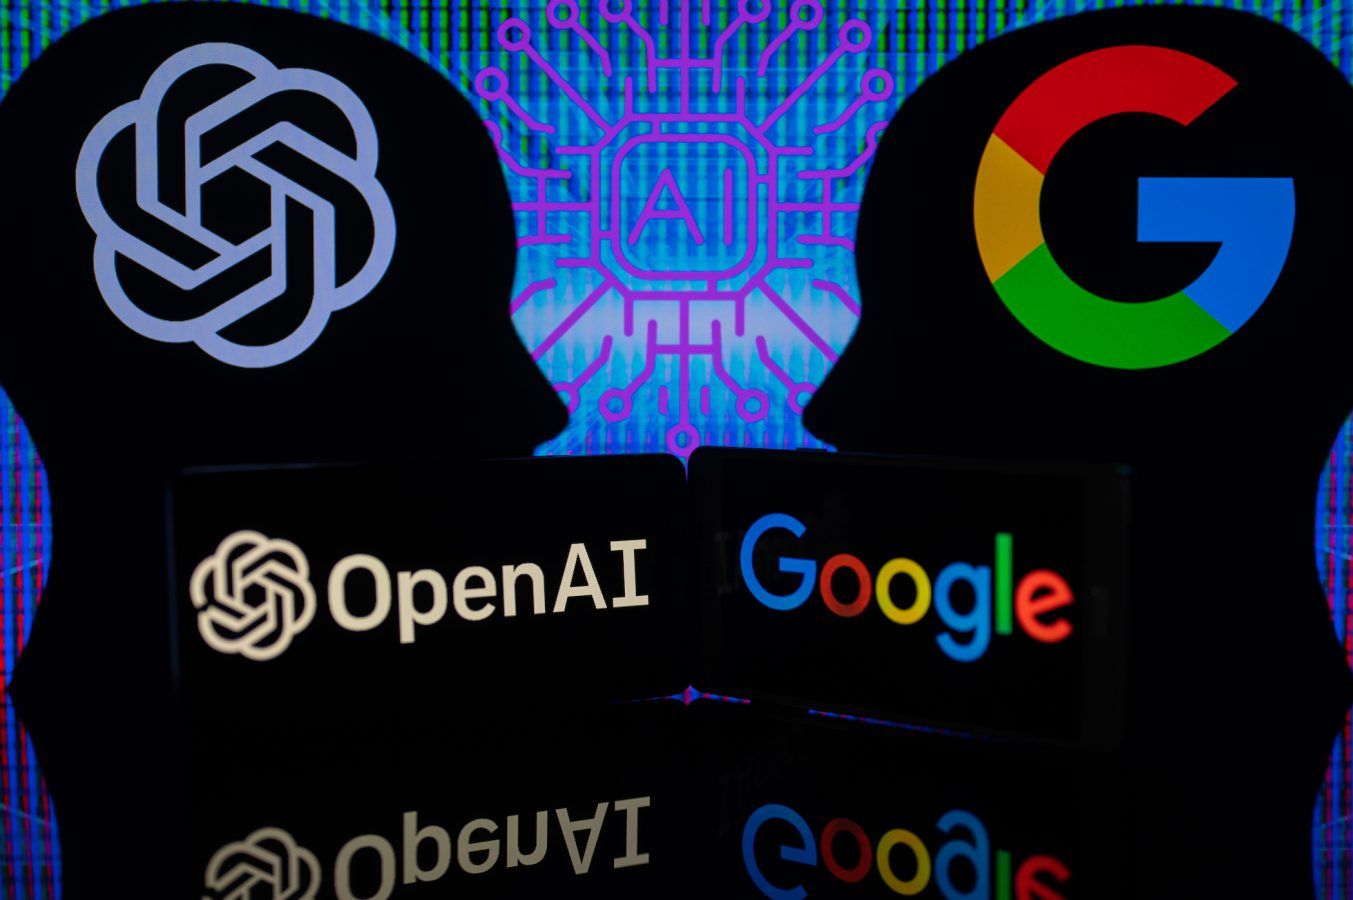 Google Bard vs OpenAI ChatGPT: Which chatbot is better and why?